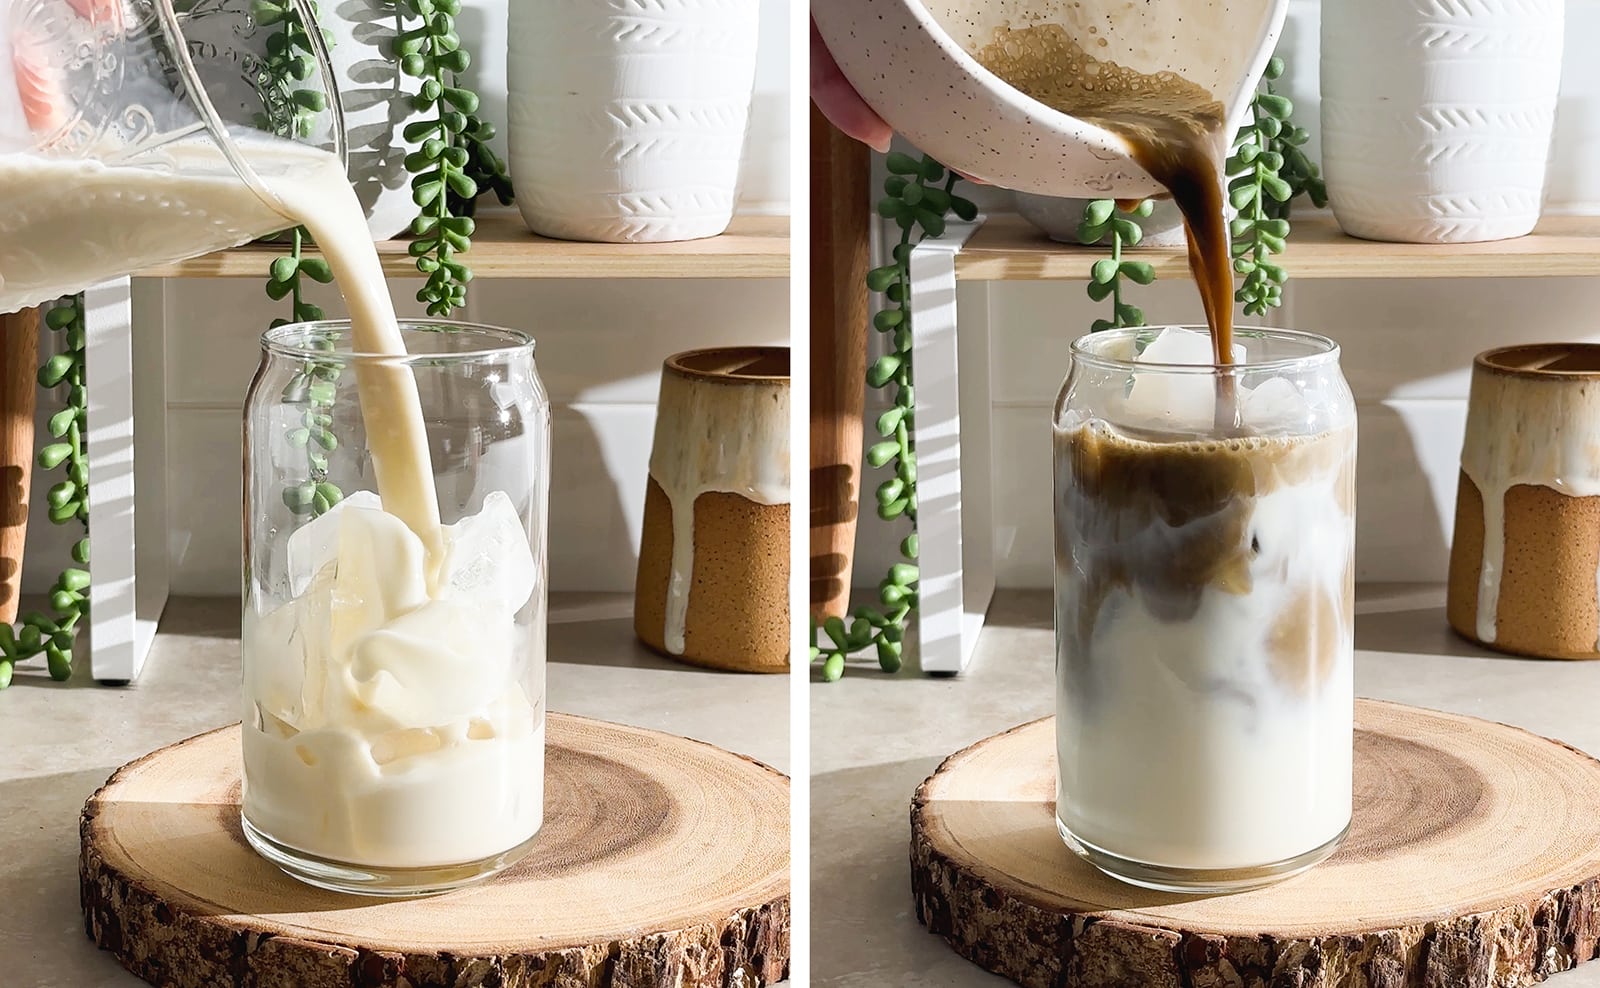 Left to right: pouring milk into glass filled halfway with ice, pouring hojicha into glass on top of milk.